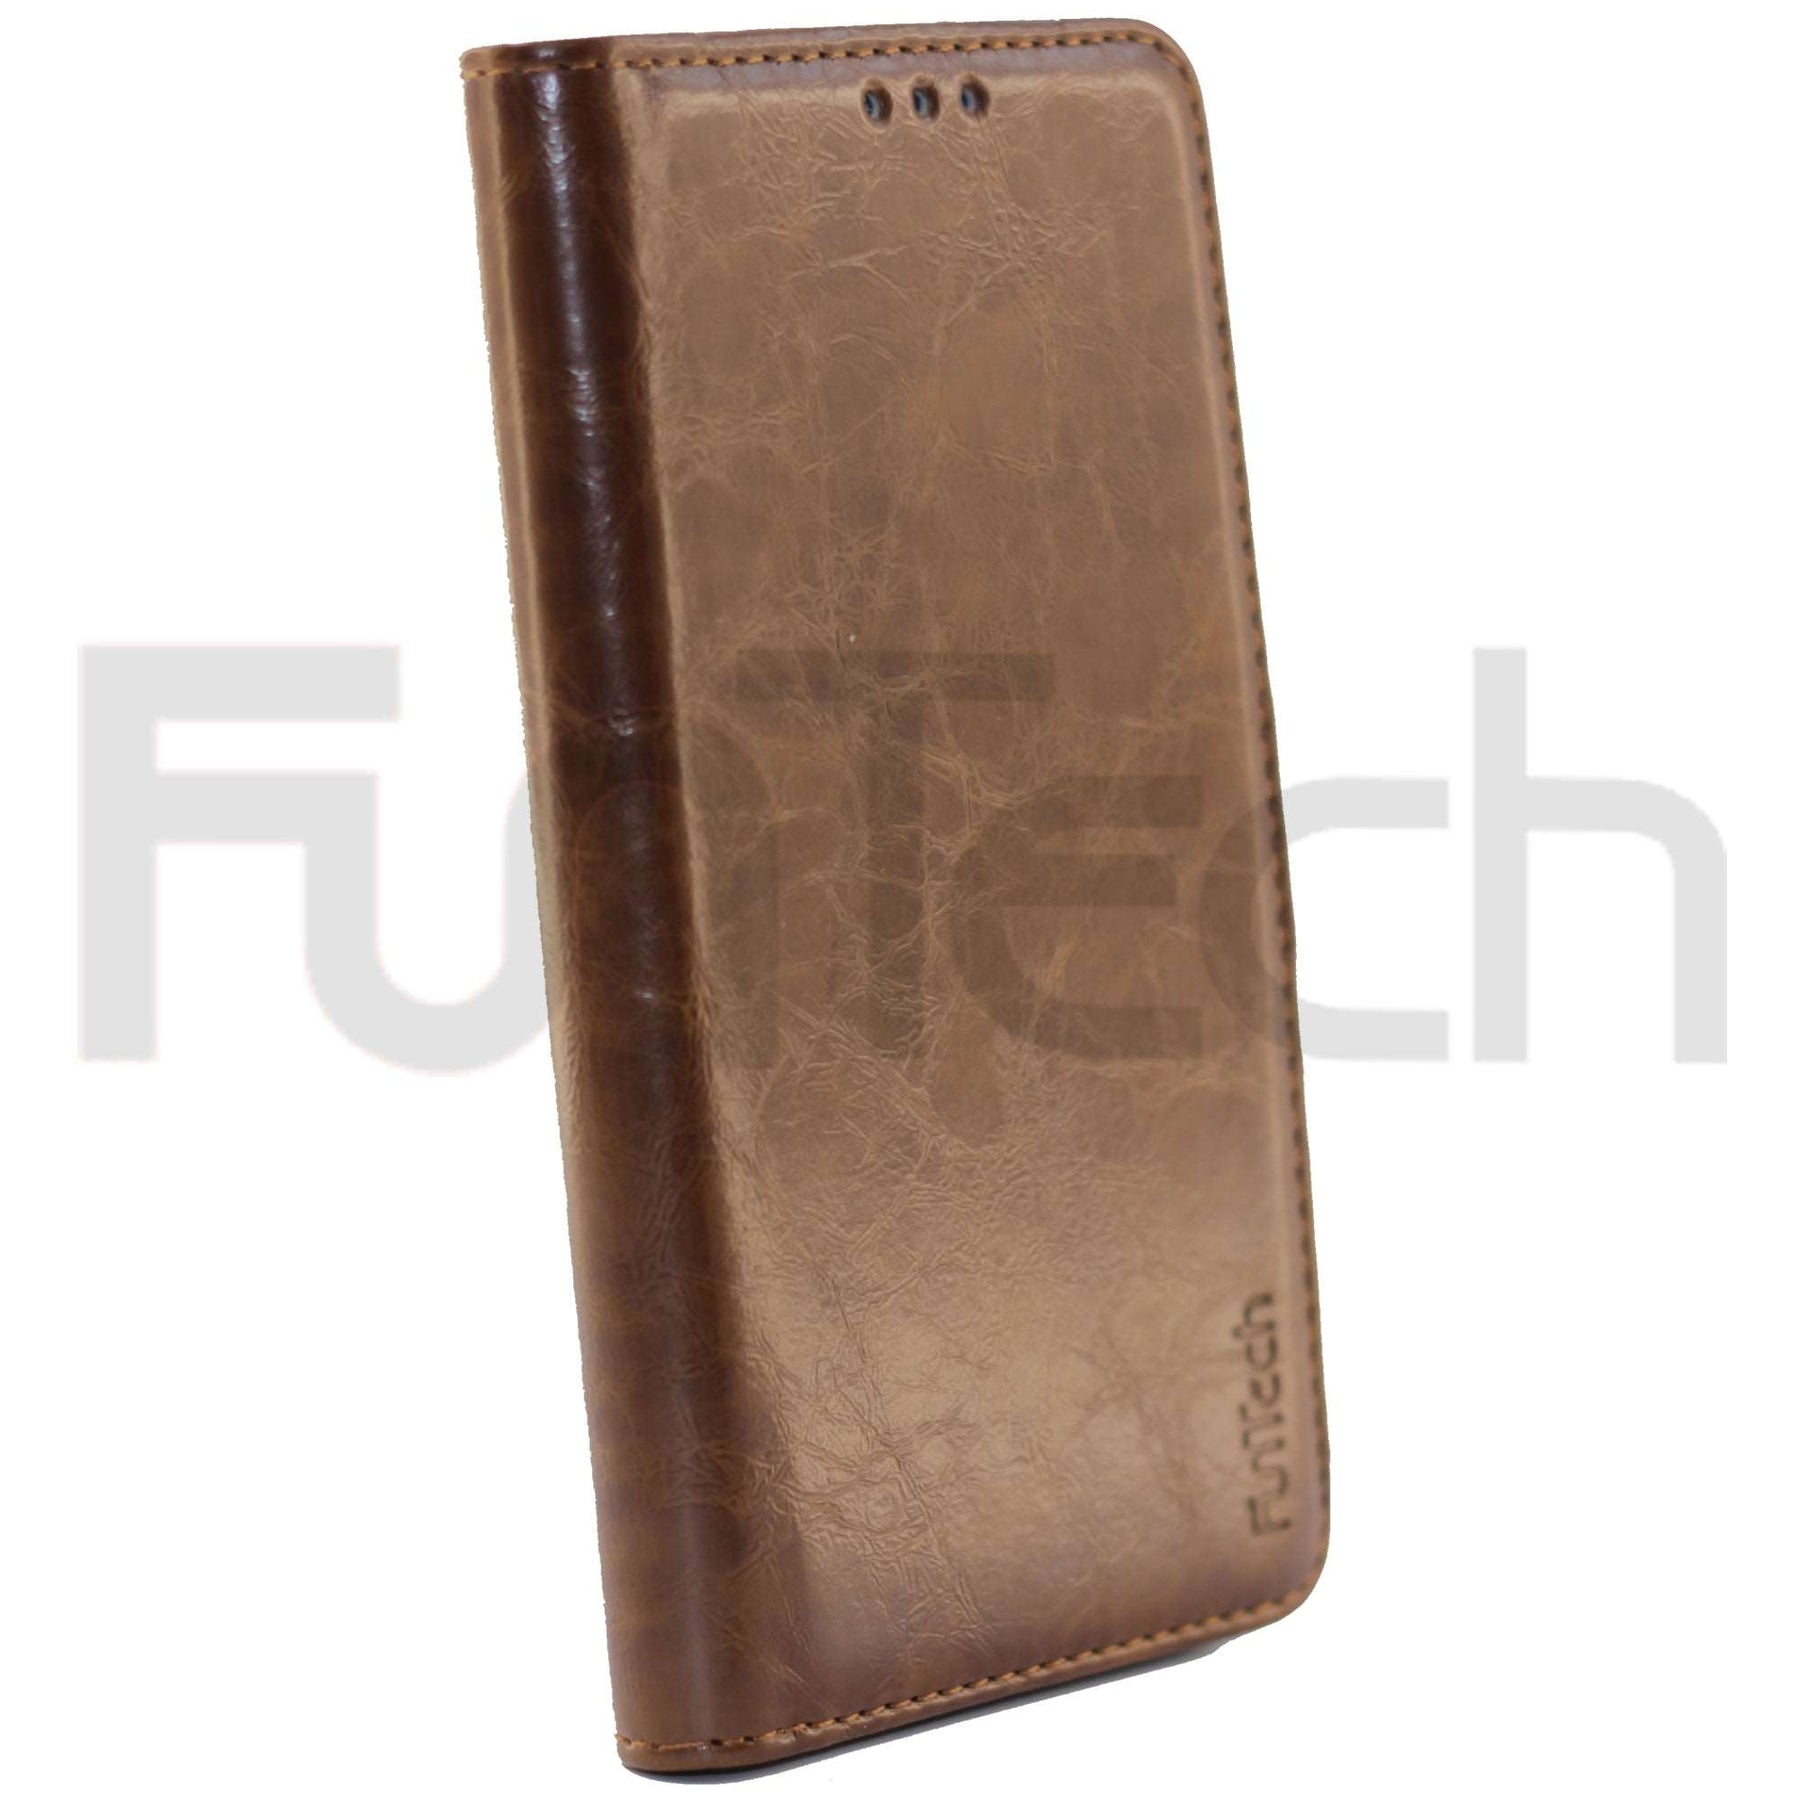 Huawei P30, Leather Wallet Case, Color brown,